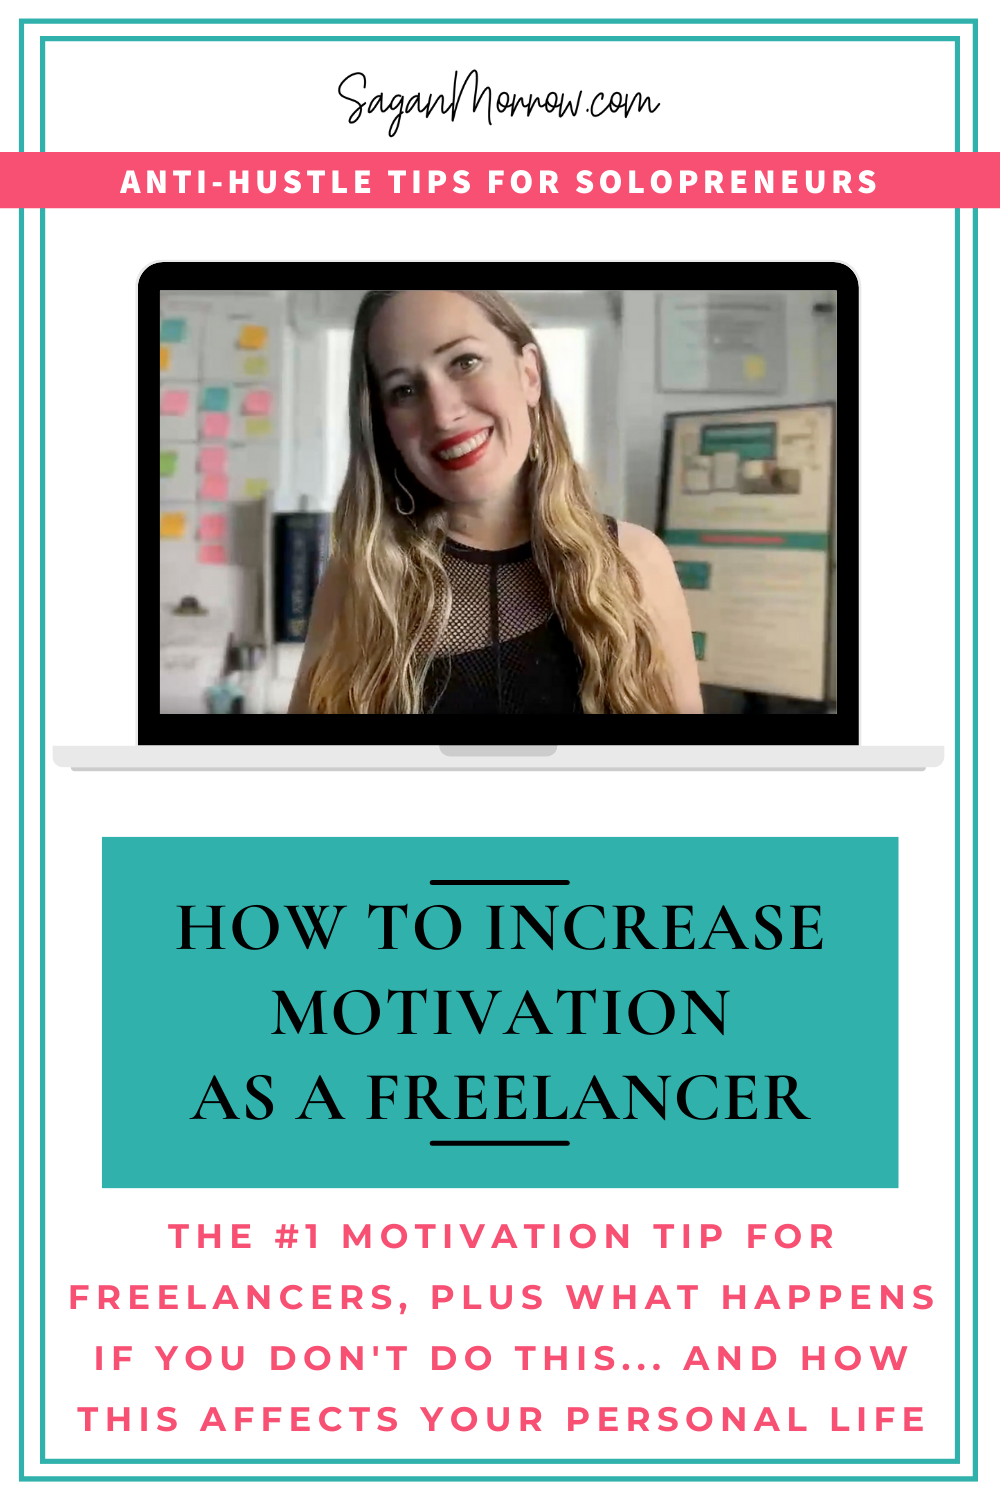 Motivation for freelancers: #1 Tip for how to stay motivated in your freelance business